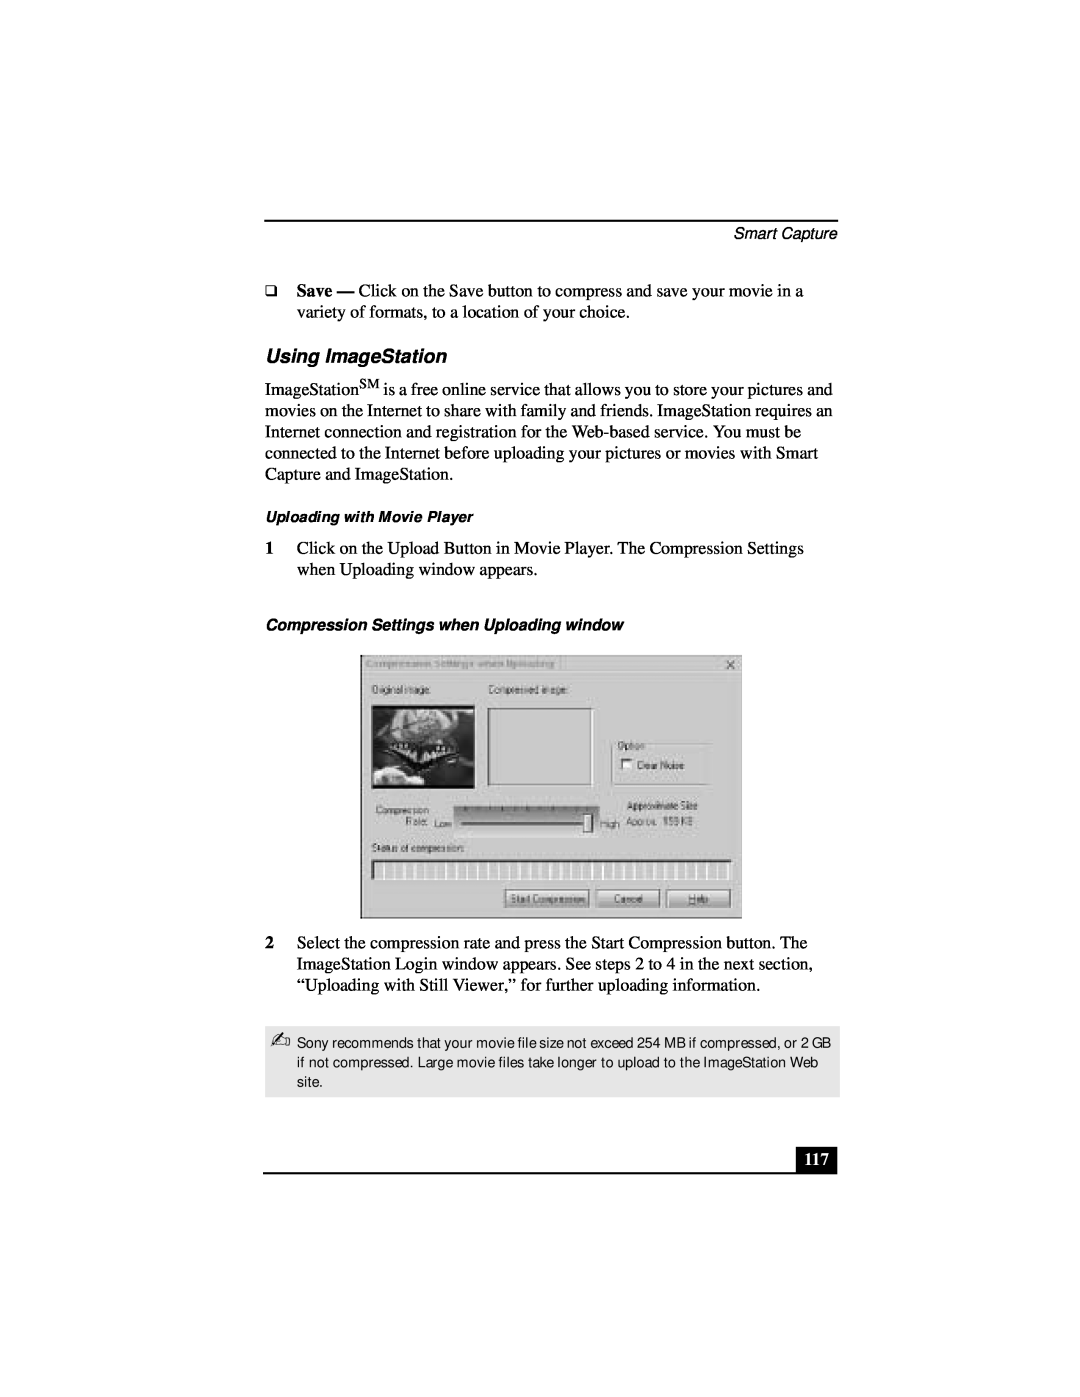 Sony Notebook Computer manual Using ImageStation, Uploading with Movie Player 